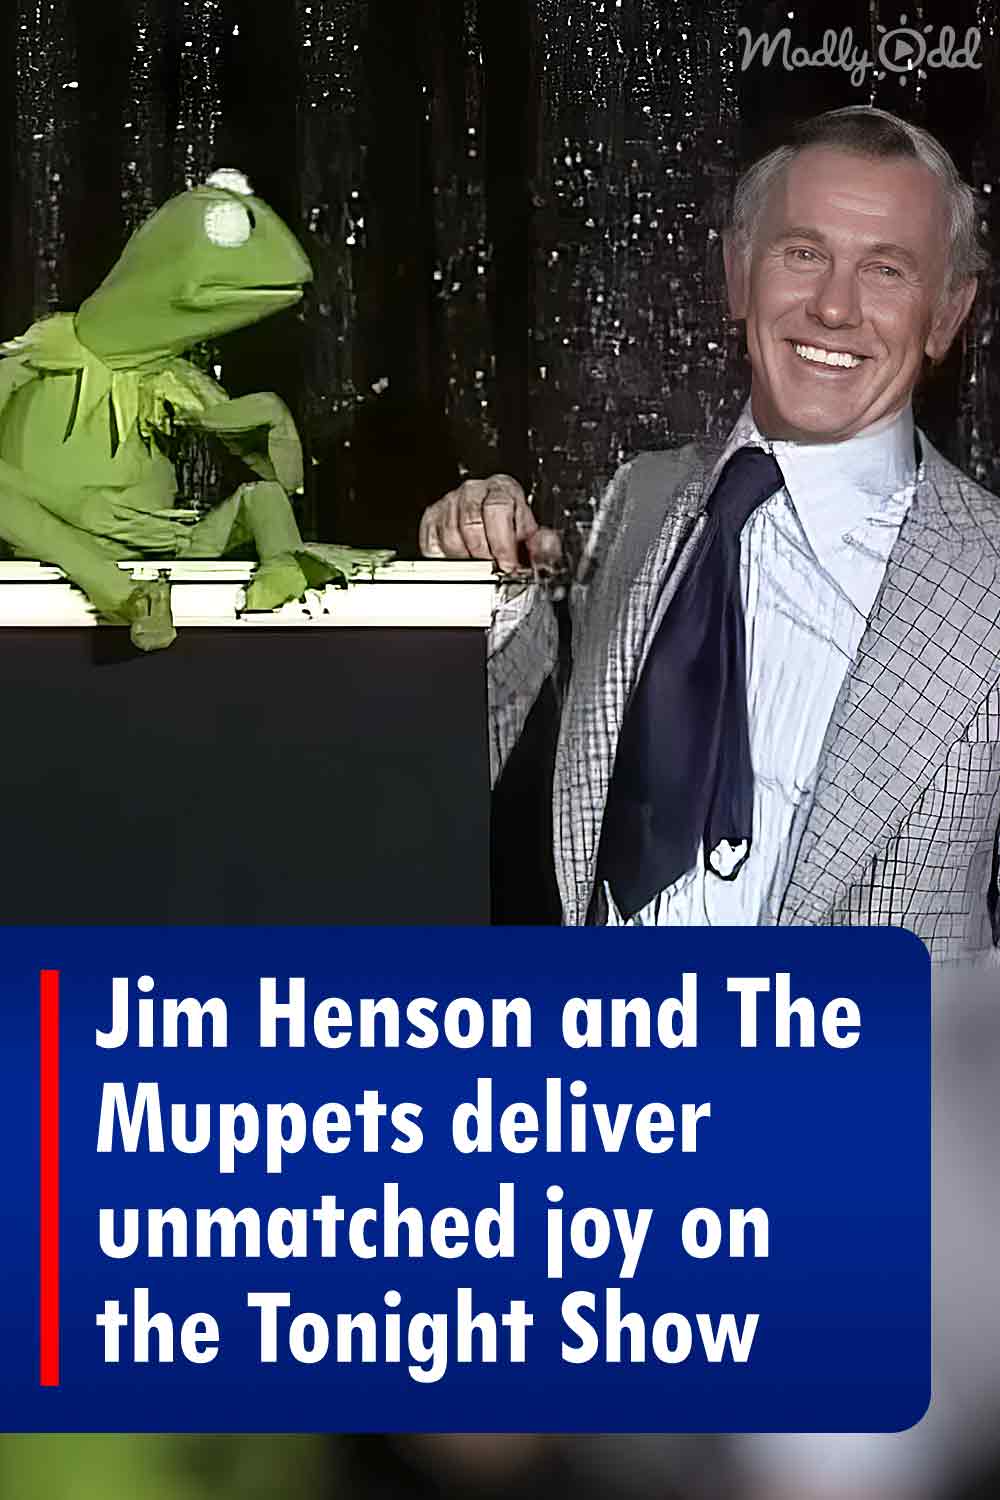 Jim Henson and The Muppets deliver unmatched joy on the Tonight Show